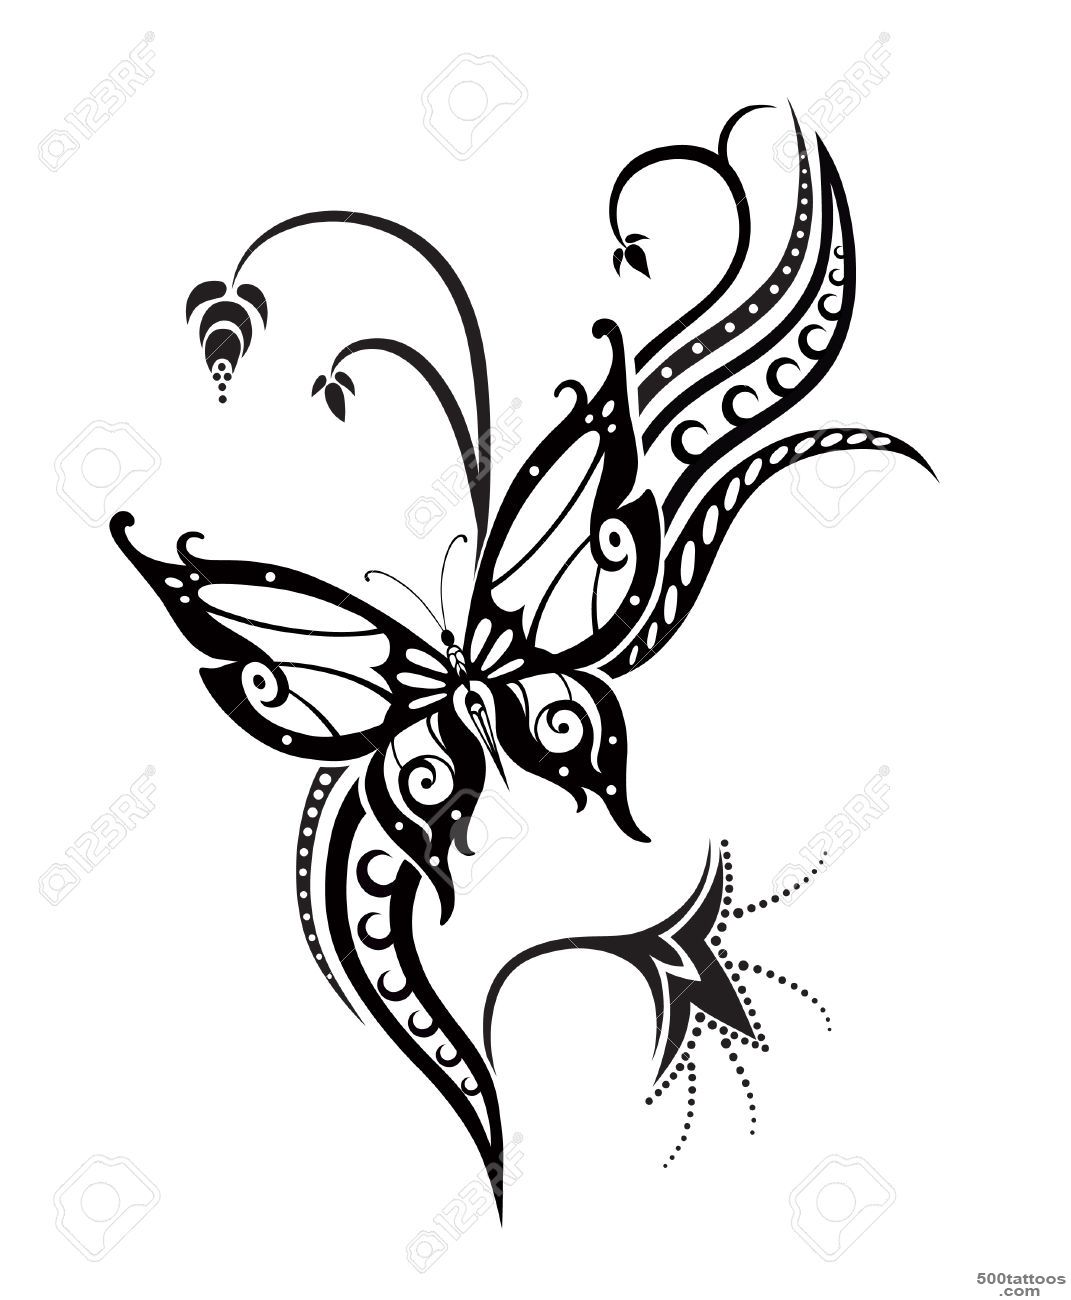 Butterfly Tattoo Images, Stock Pictures, Royalty Free Butterfly ..._26